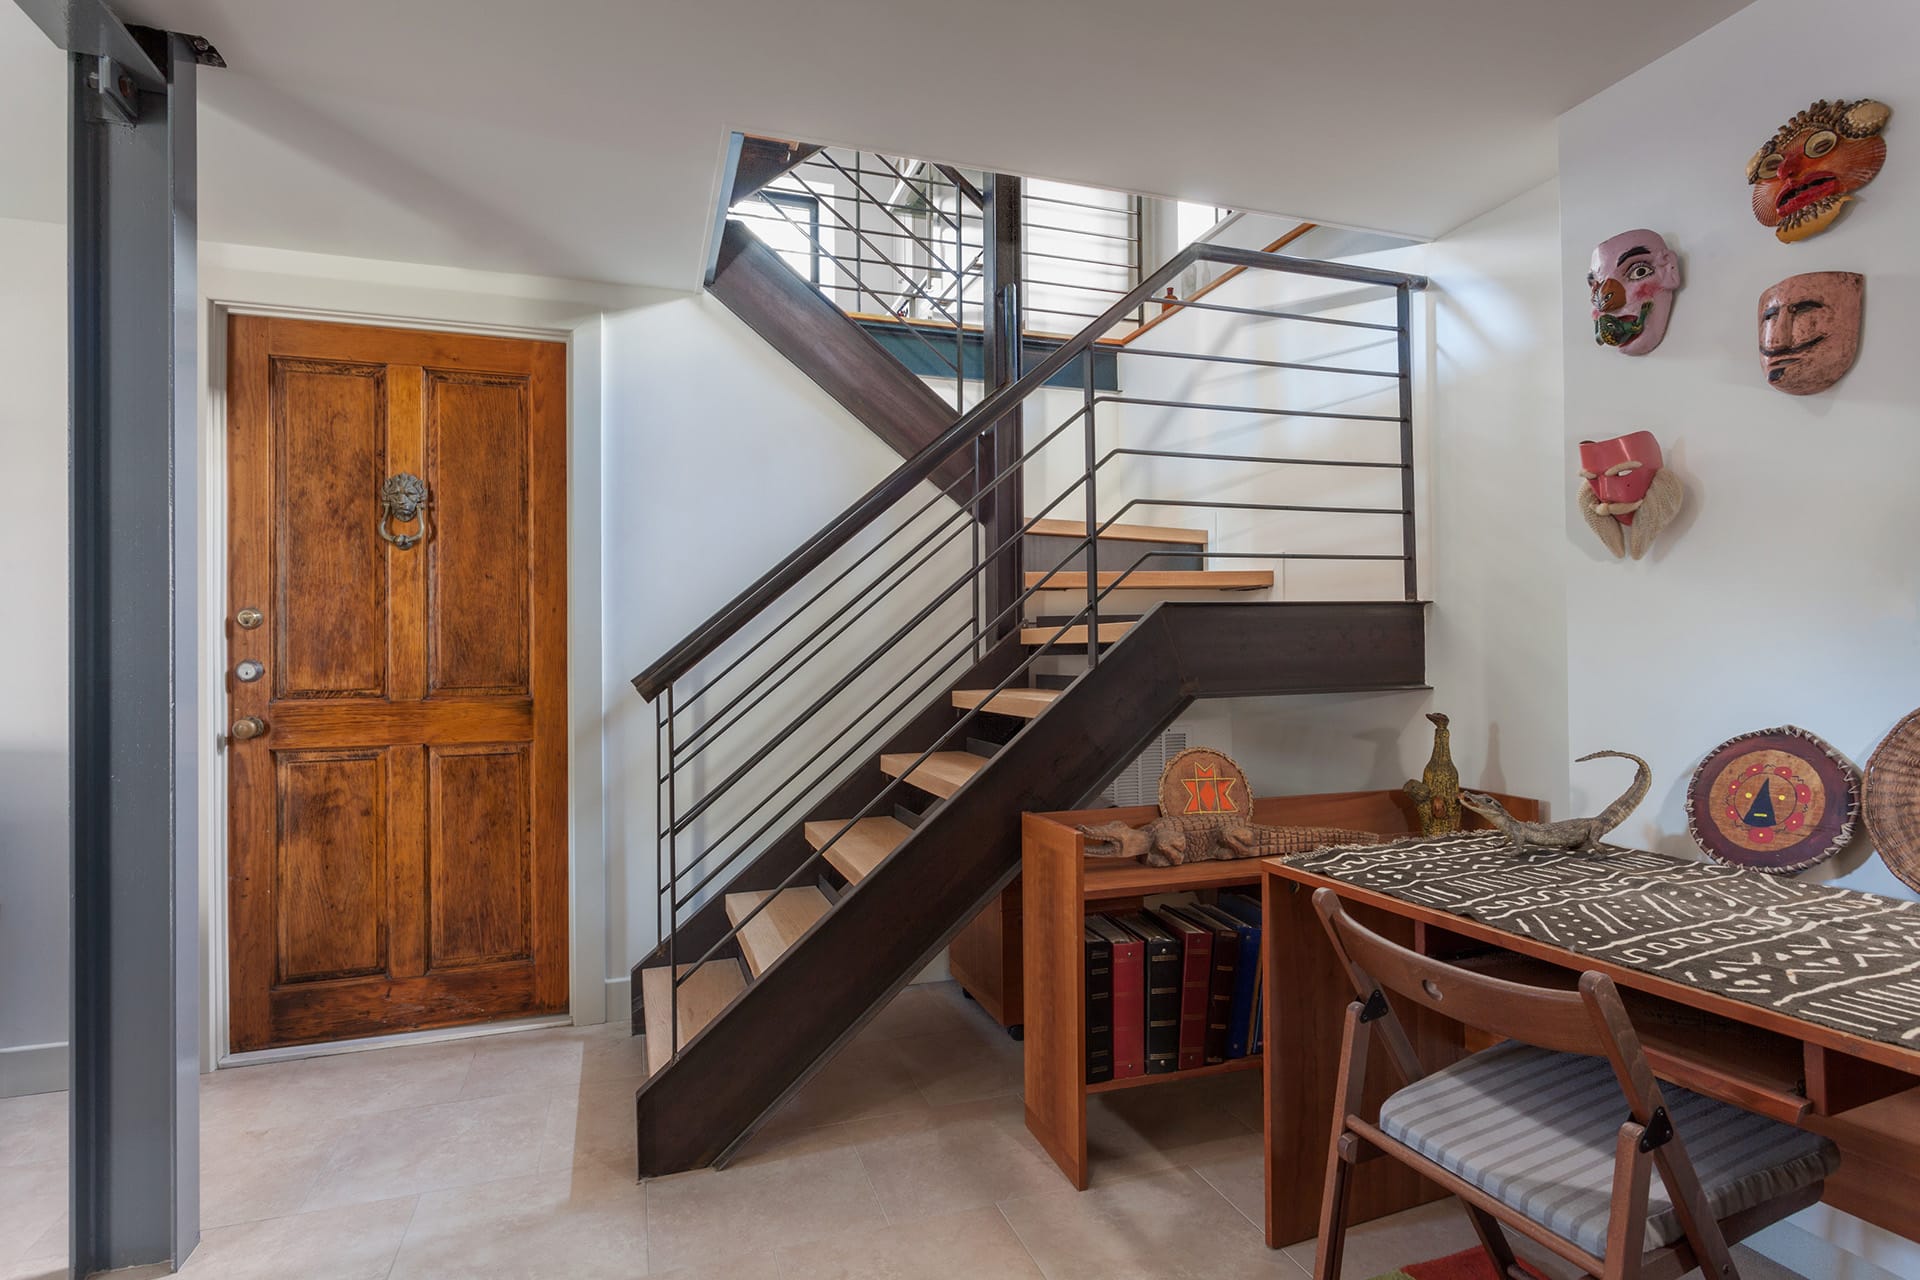 Metal staircase with wood risers, a historical door, and masks and sculptures in the basement of a Cobble Hill carriage house